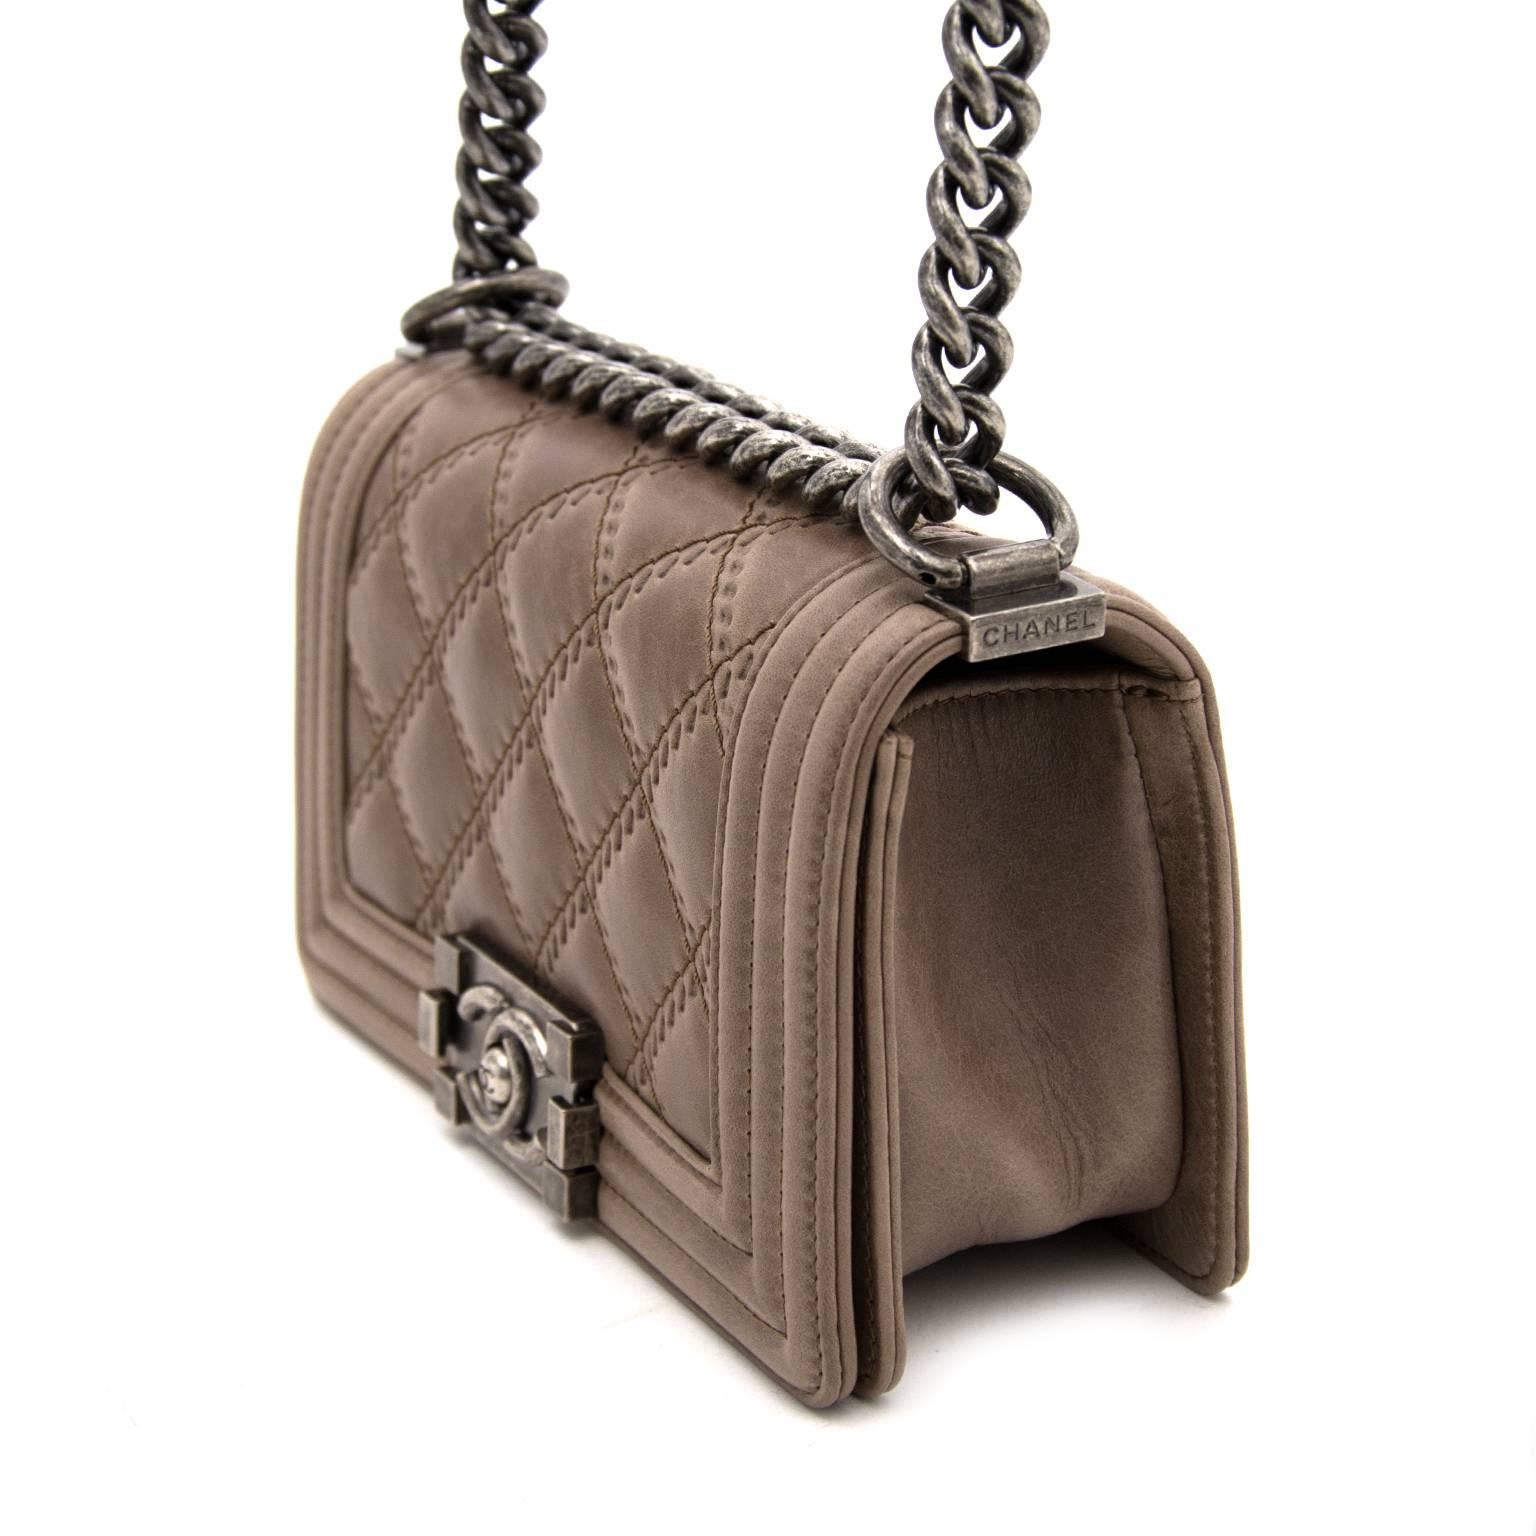 The Chanel Boy bag is one of Chanel’s most sought-after bags. This taupe calfs leather suits every outfit.
Its structured lines and brushed silver hardware have made the Chanel Boy bag forever recognizable.
Comes with dustbag